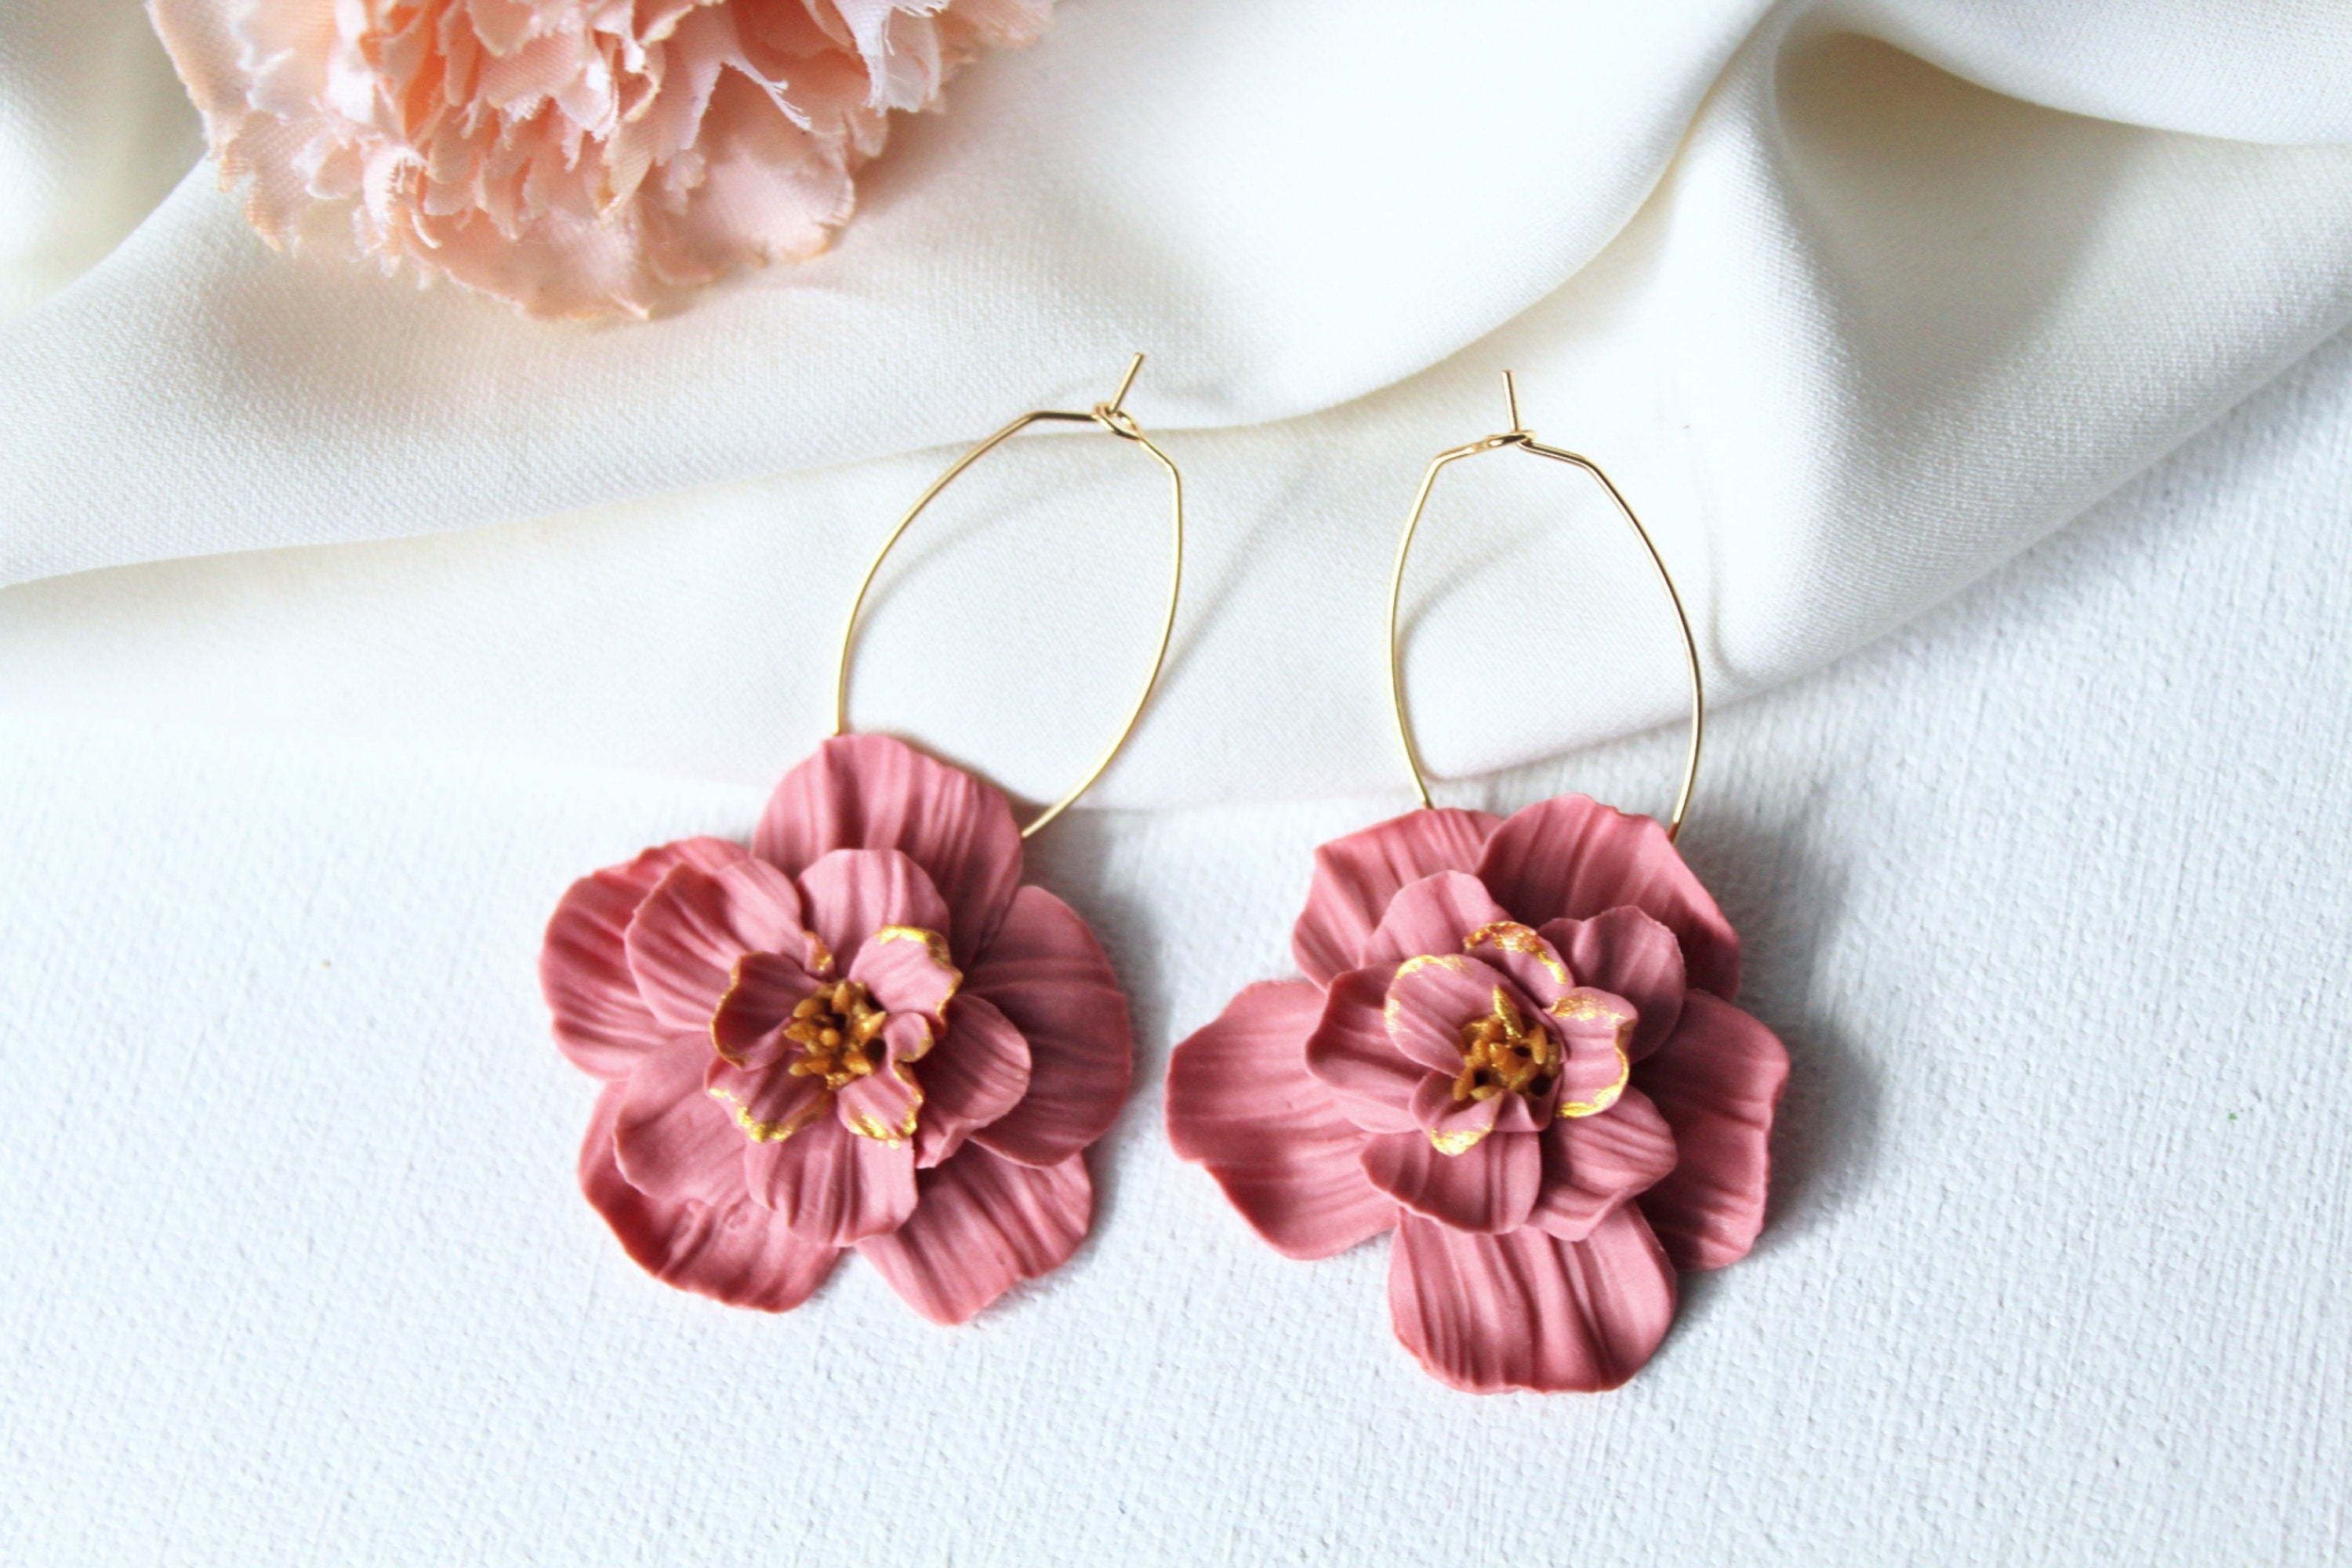 FANNY Hoop Earrings With Smooth Flower Petals in Marbled Effect Acrylic,  Sezane-inspired, Handcrafted - Etsy